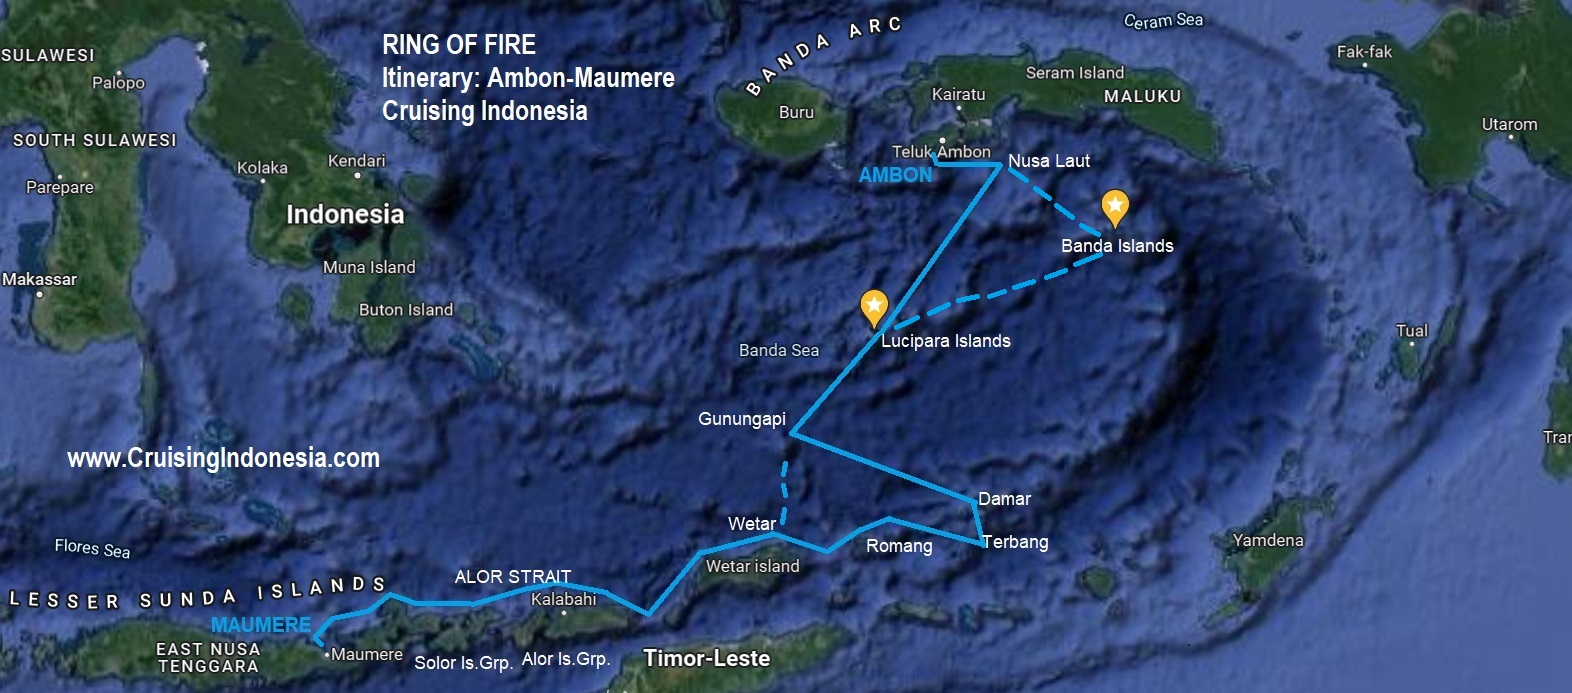 Ring of Fire itinerary from Ambon to Maumere